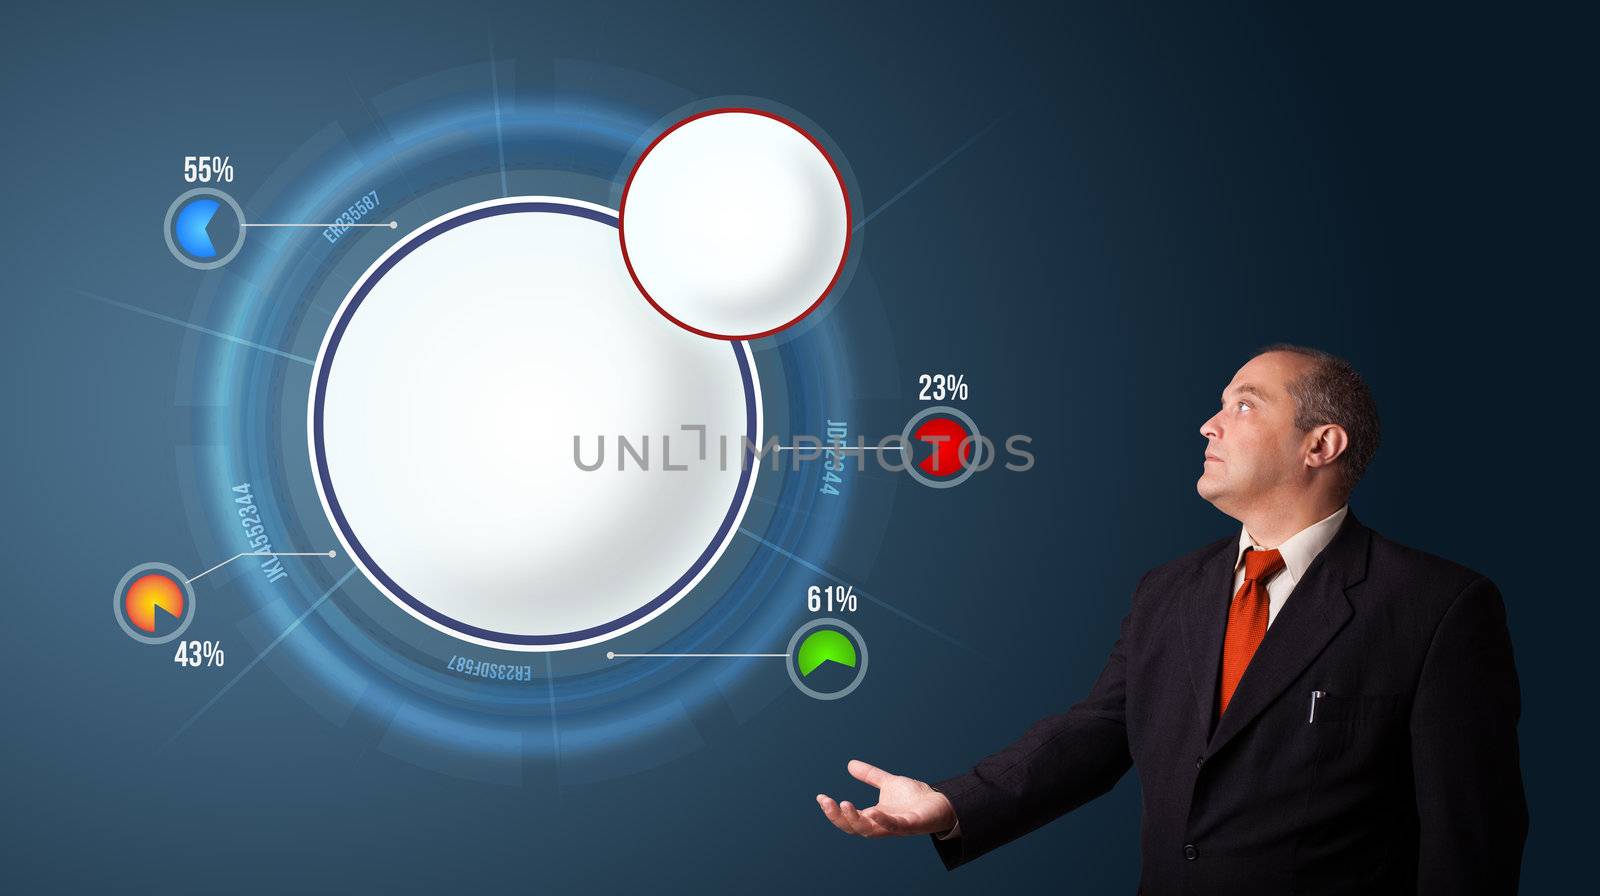 businessman in suit presenting abstract modern pie chart with copy space